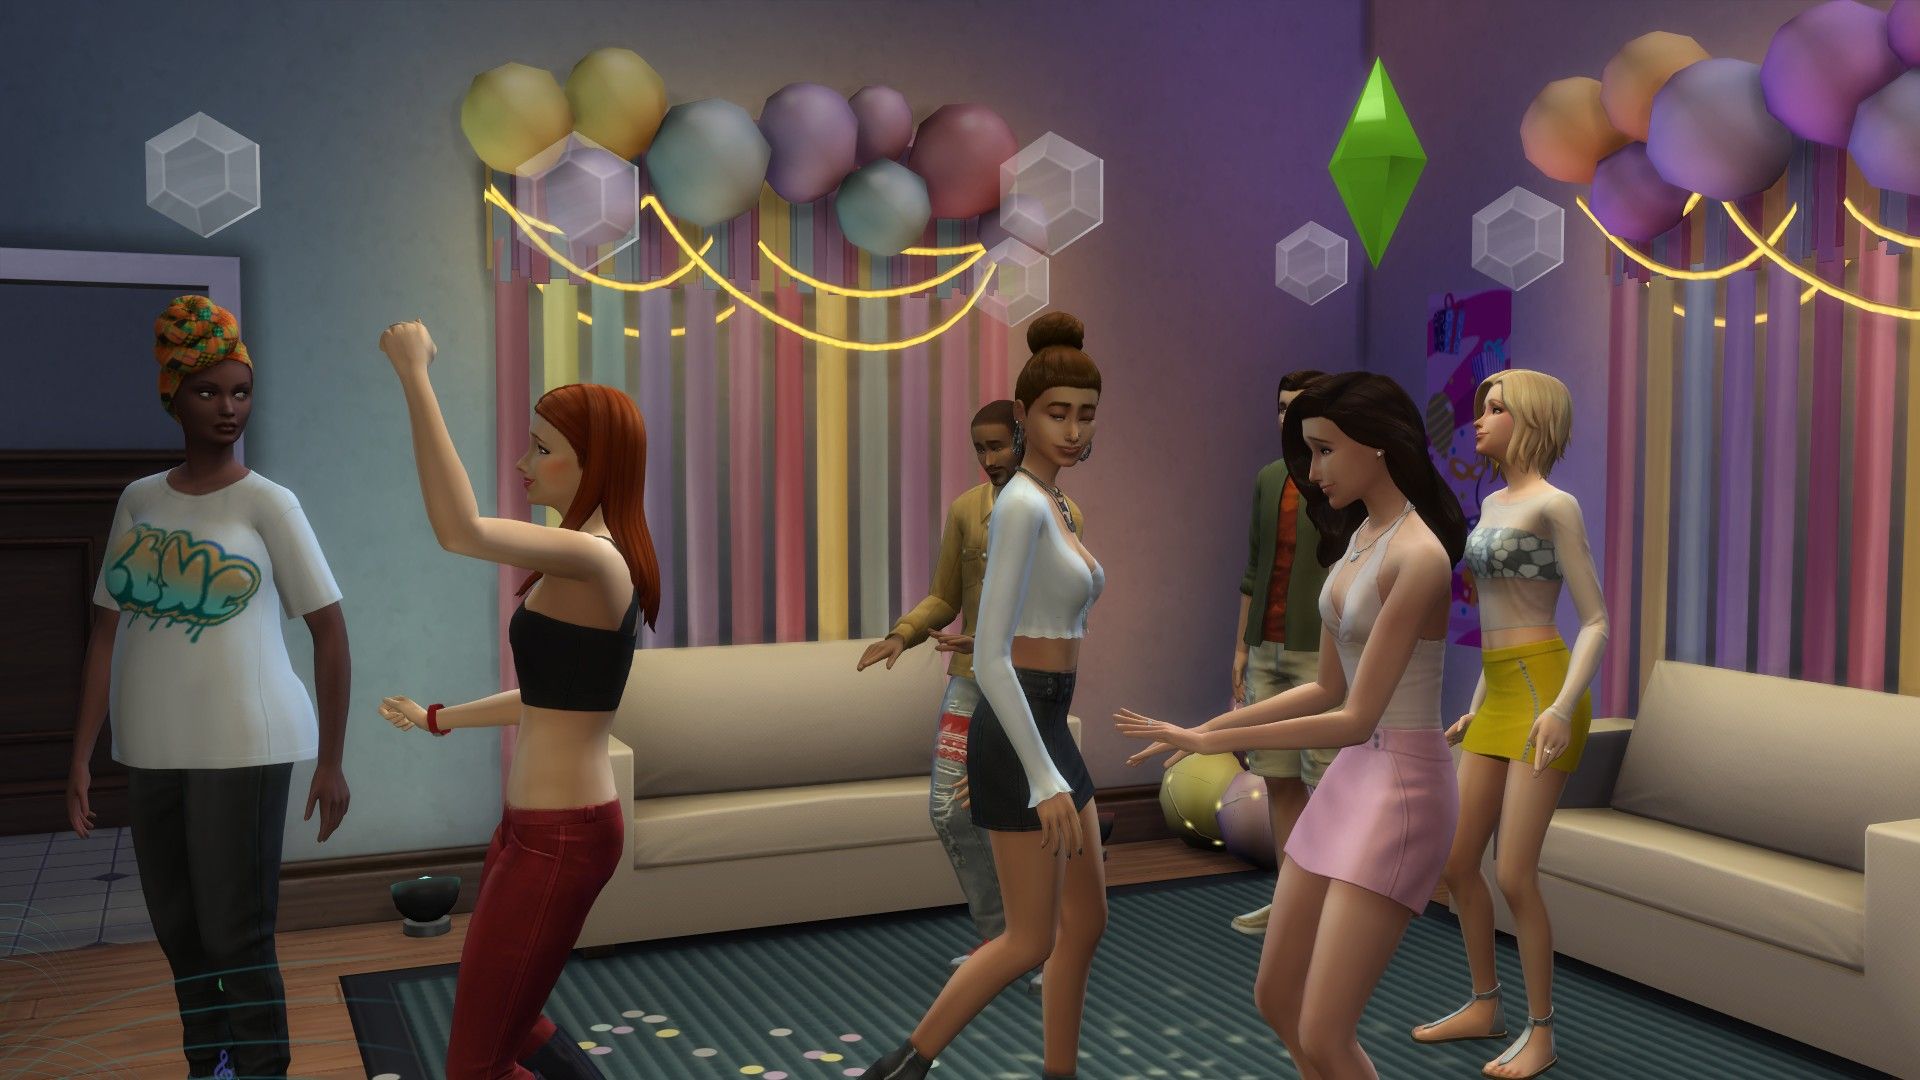 sims at a party the sims 4 party essentials kit